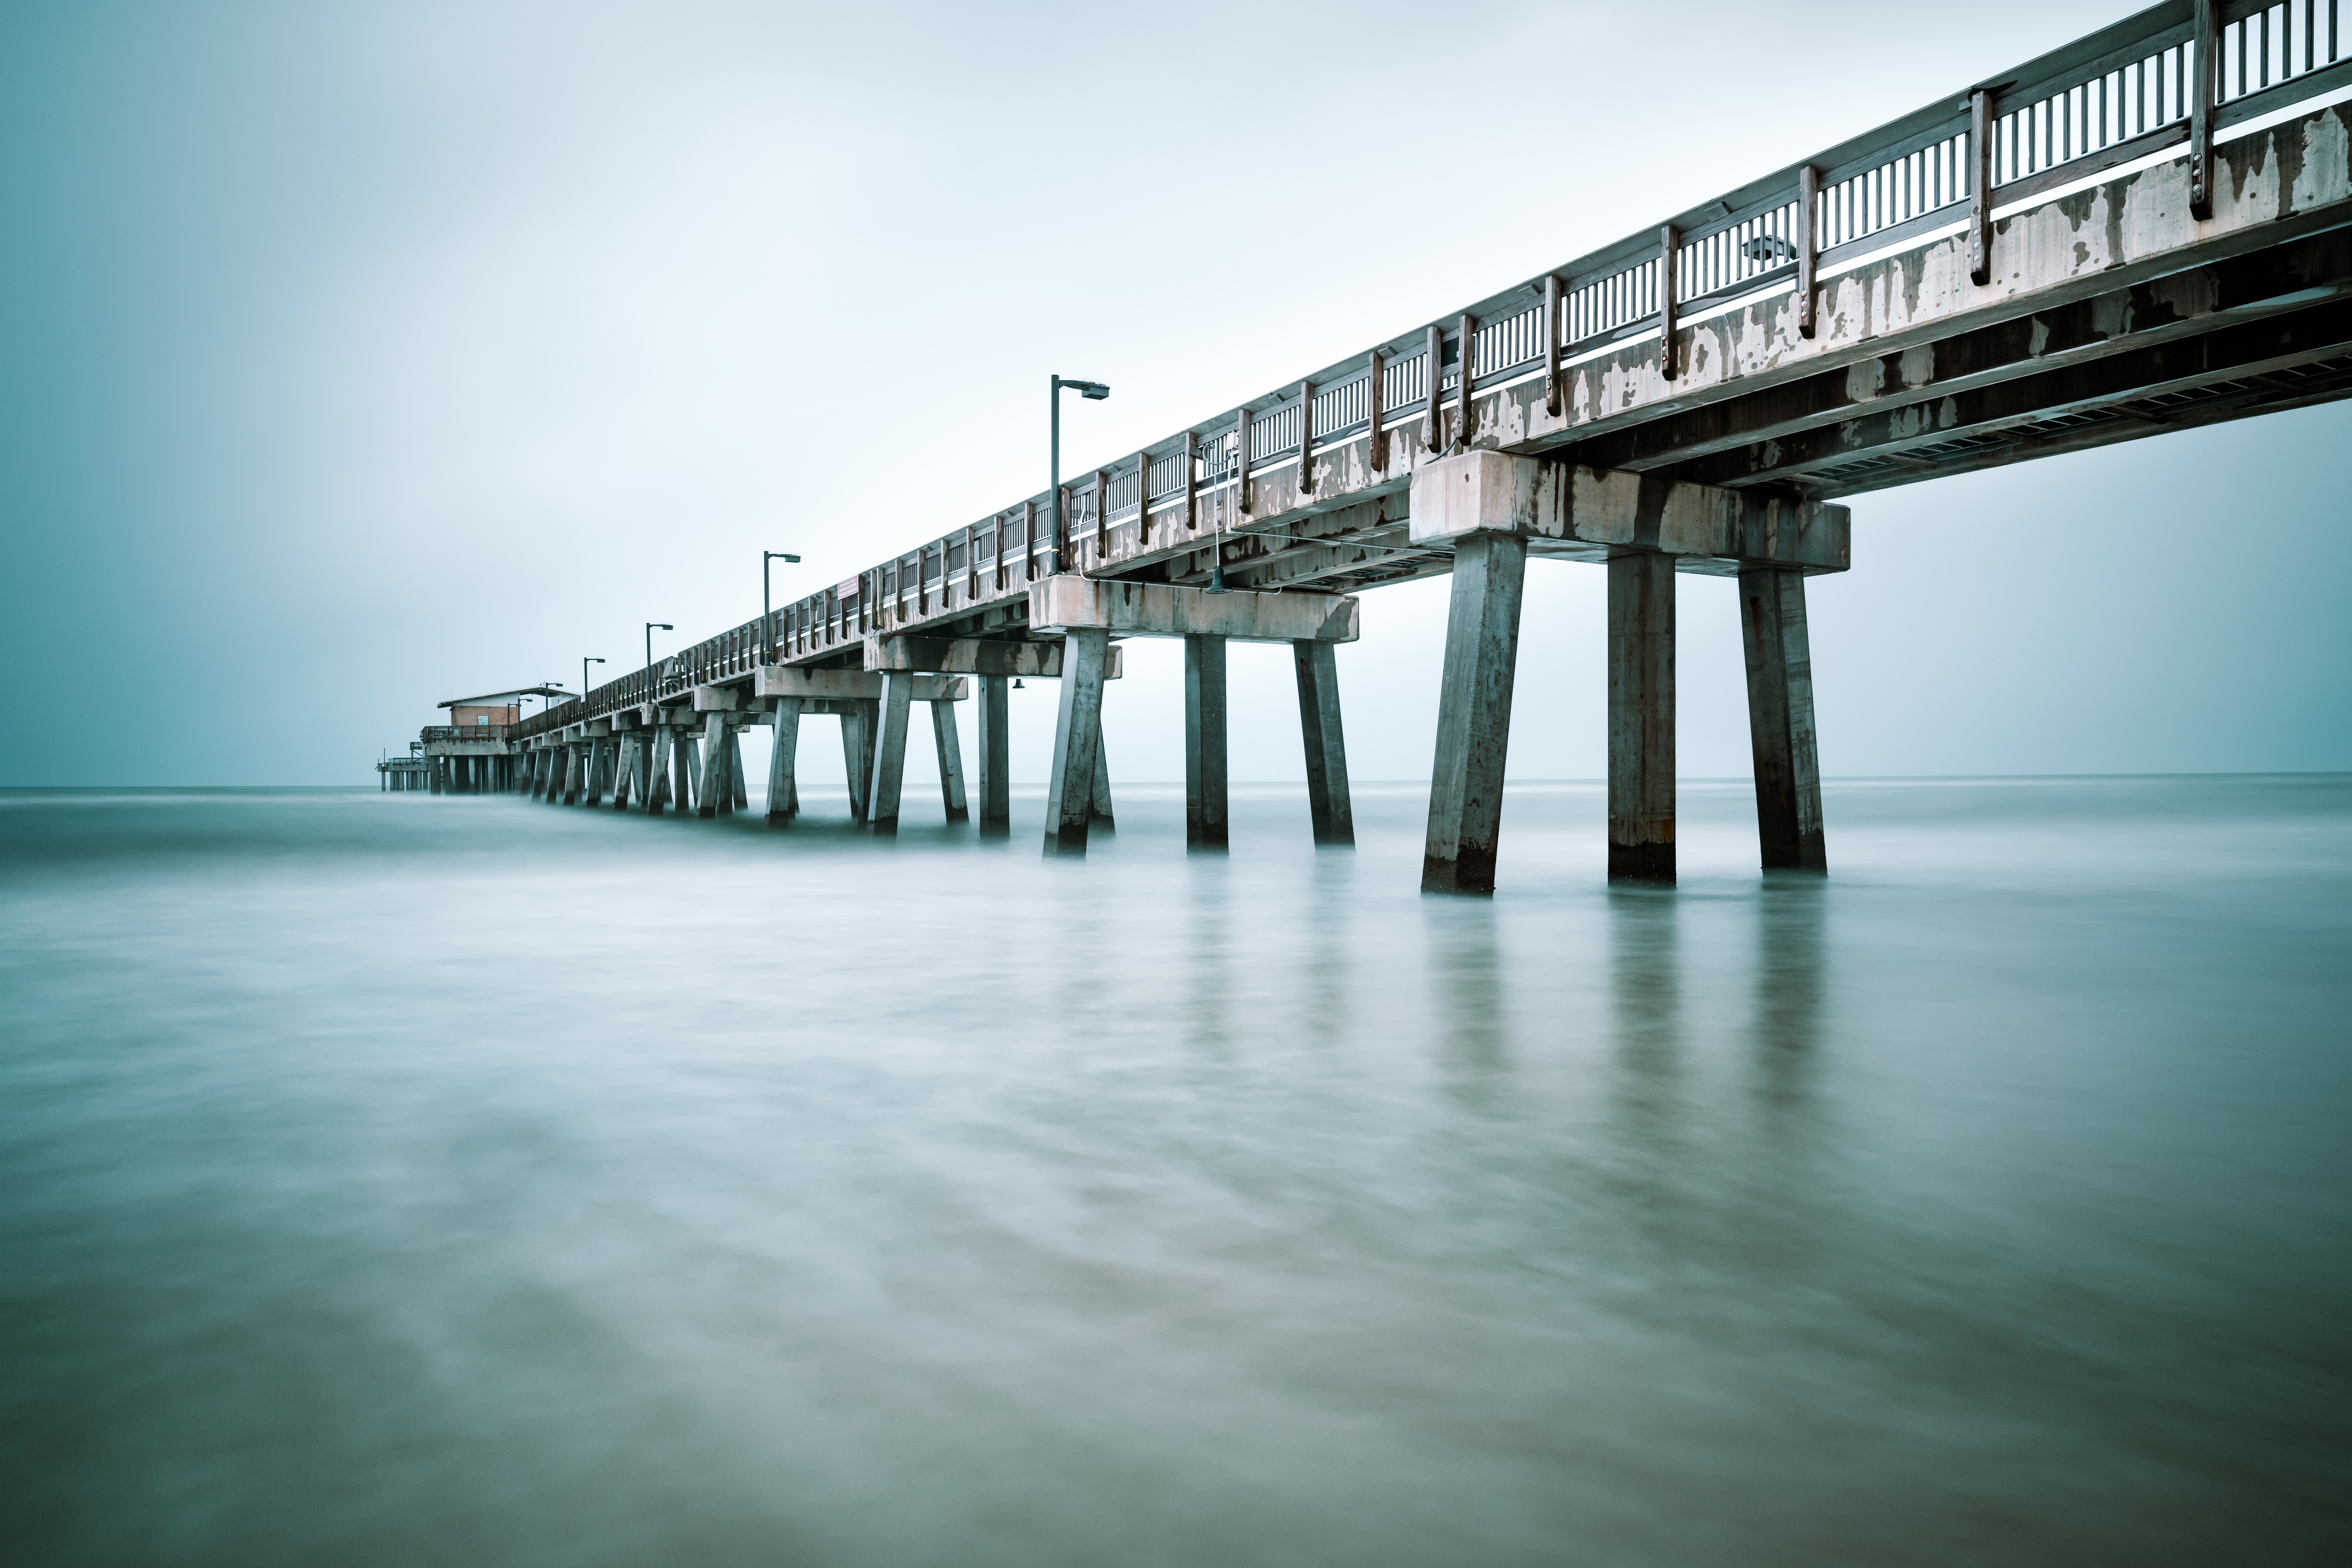 Gulf State Park Pier in a Storm